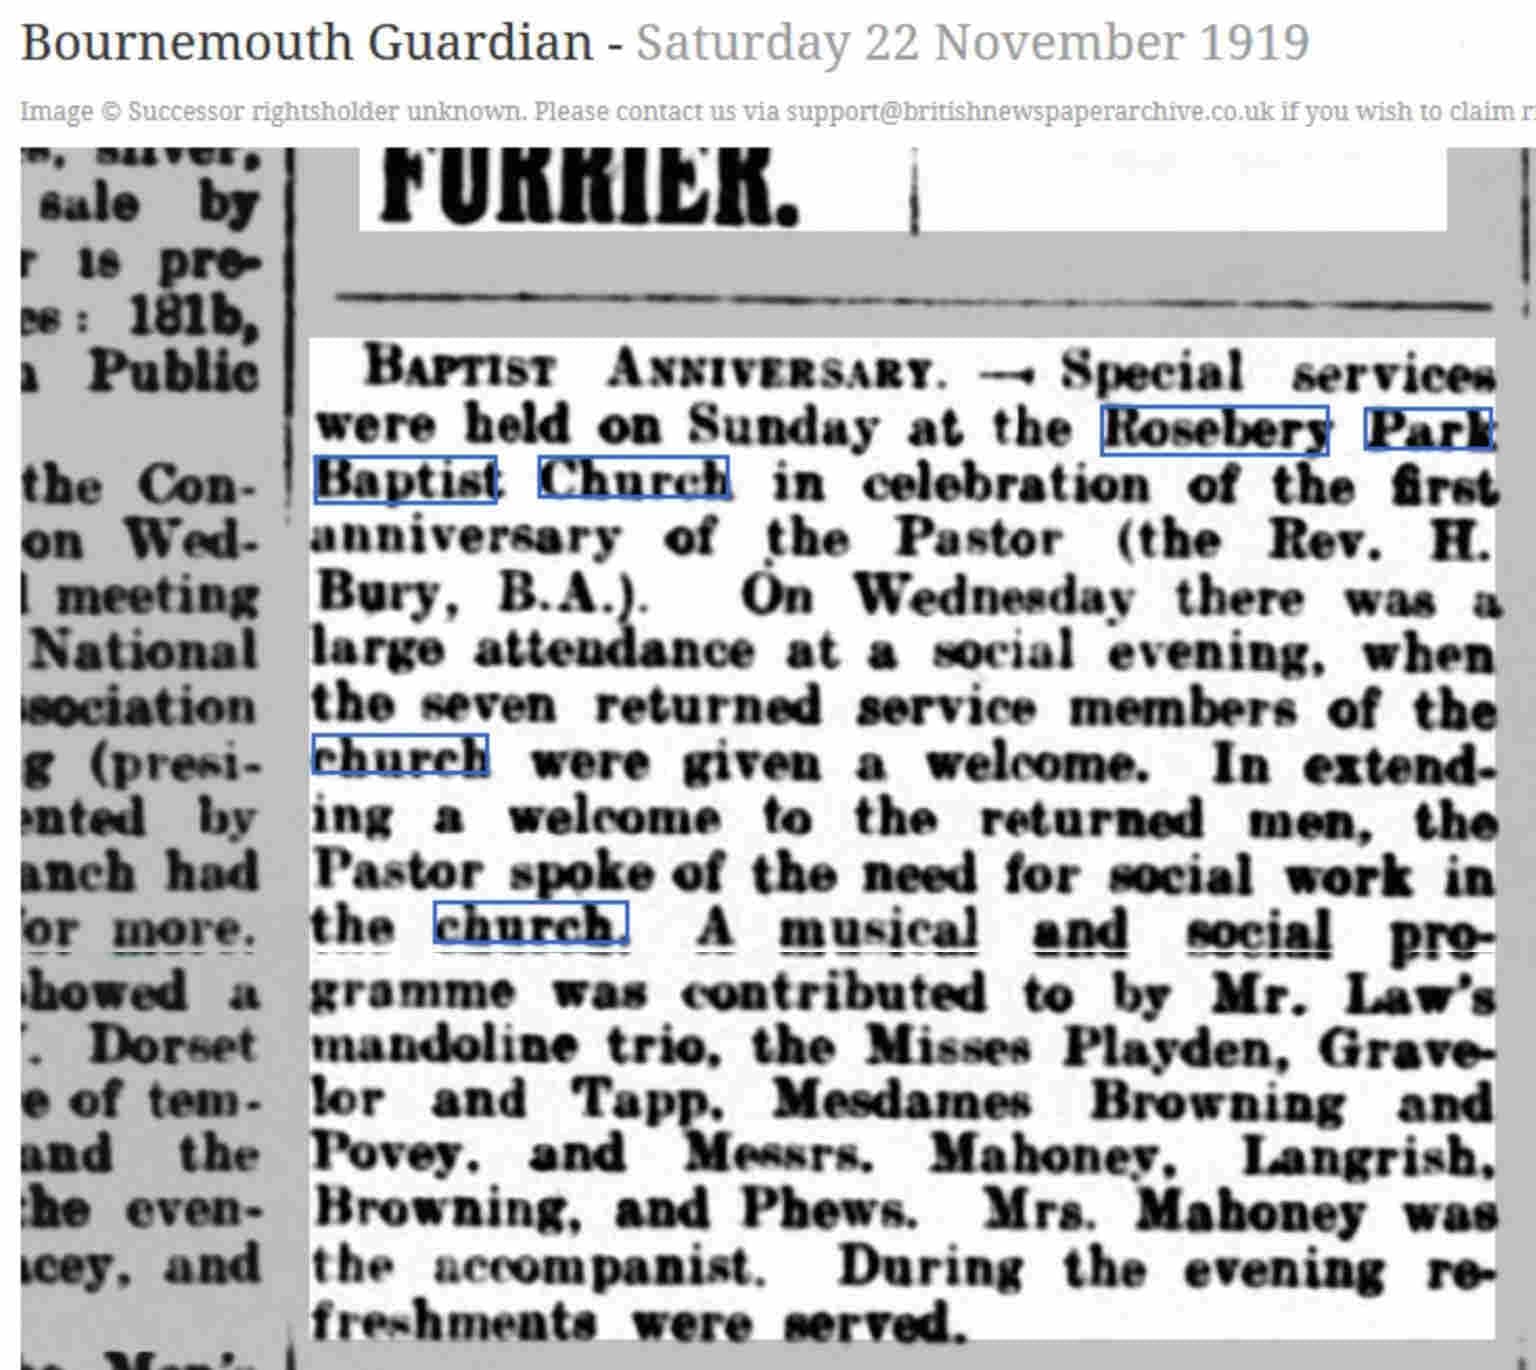 Bournemouth Guardian article November 1919 on the first anniversary on Rev Bury at Rosebery Park Baptist and the returning service men.